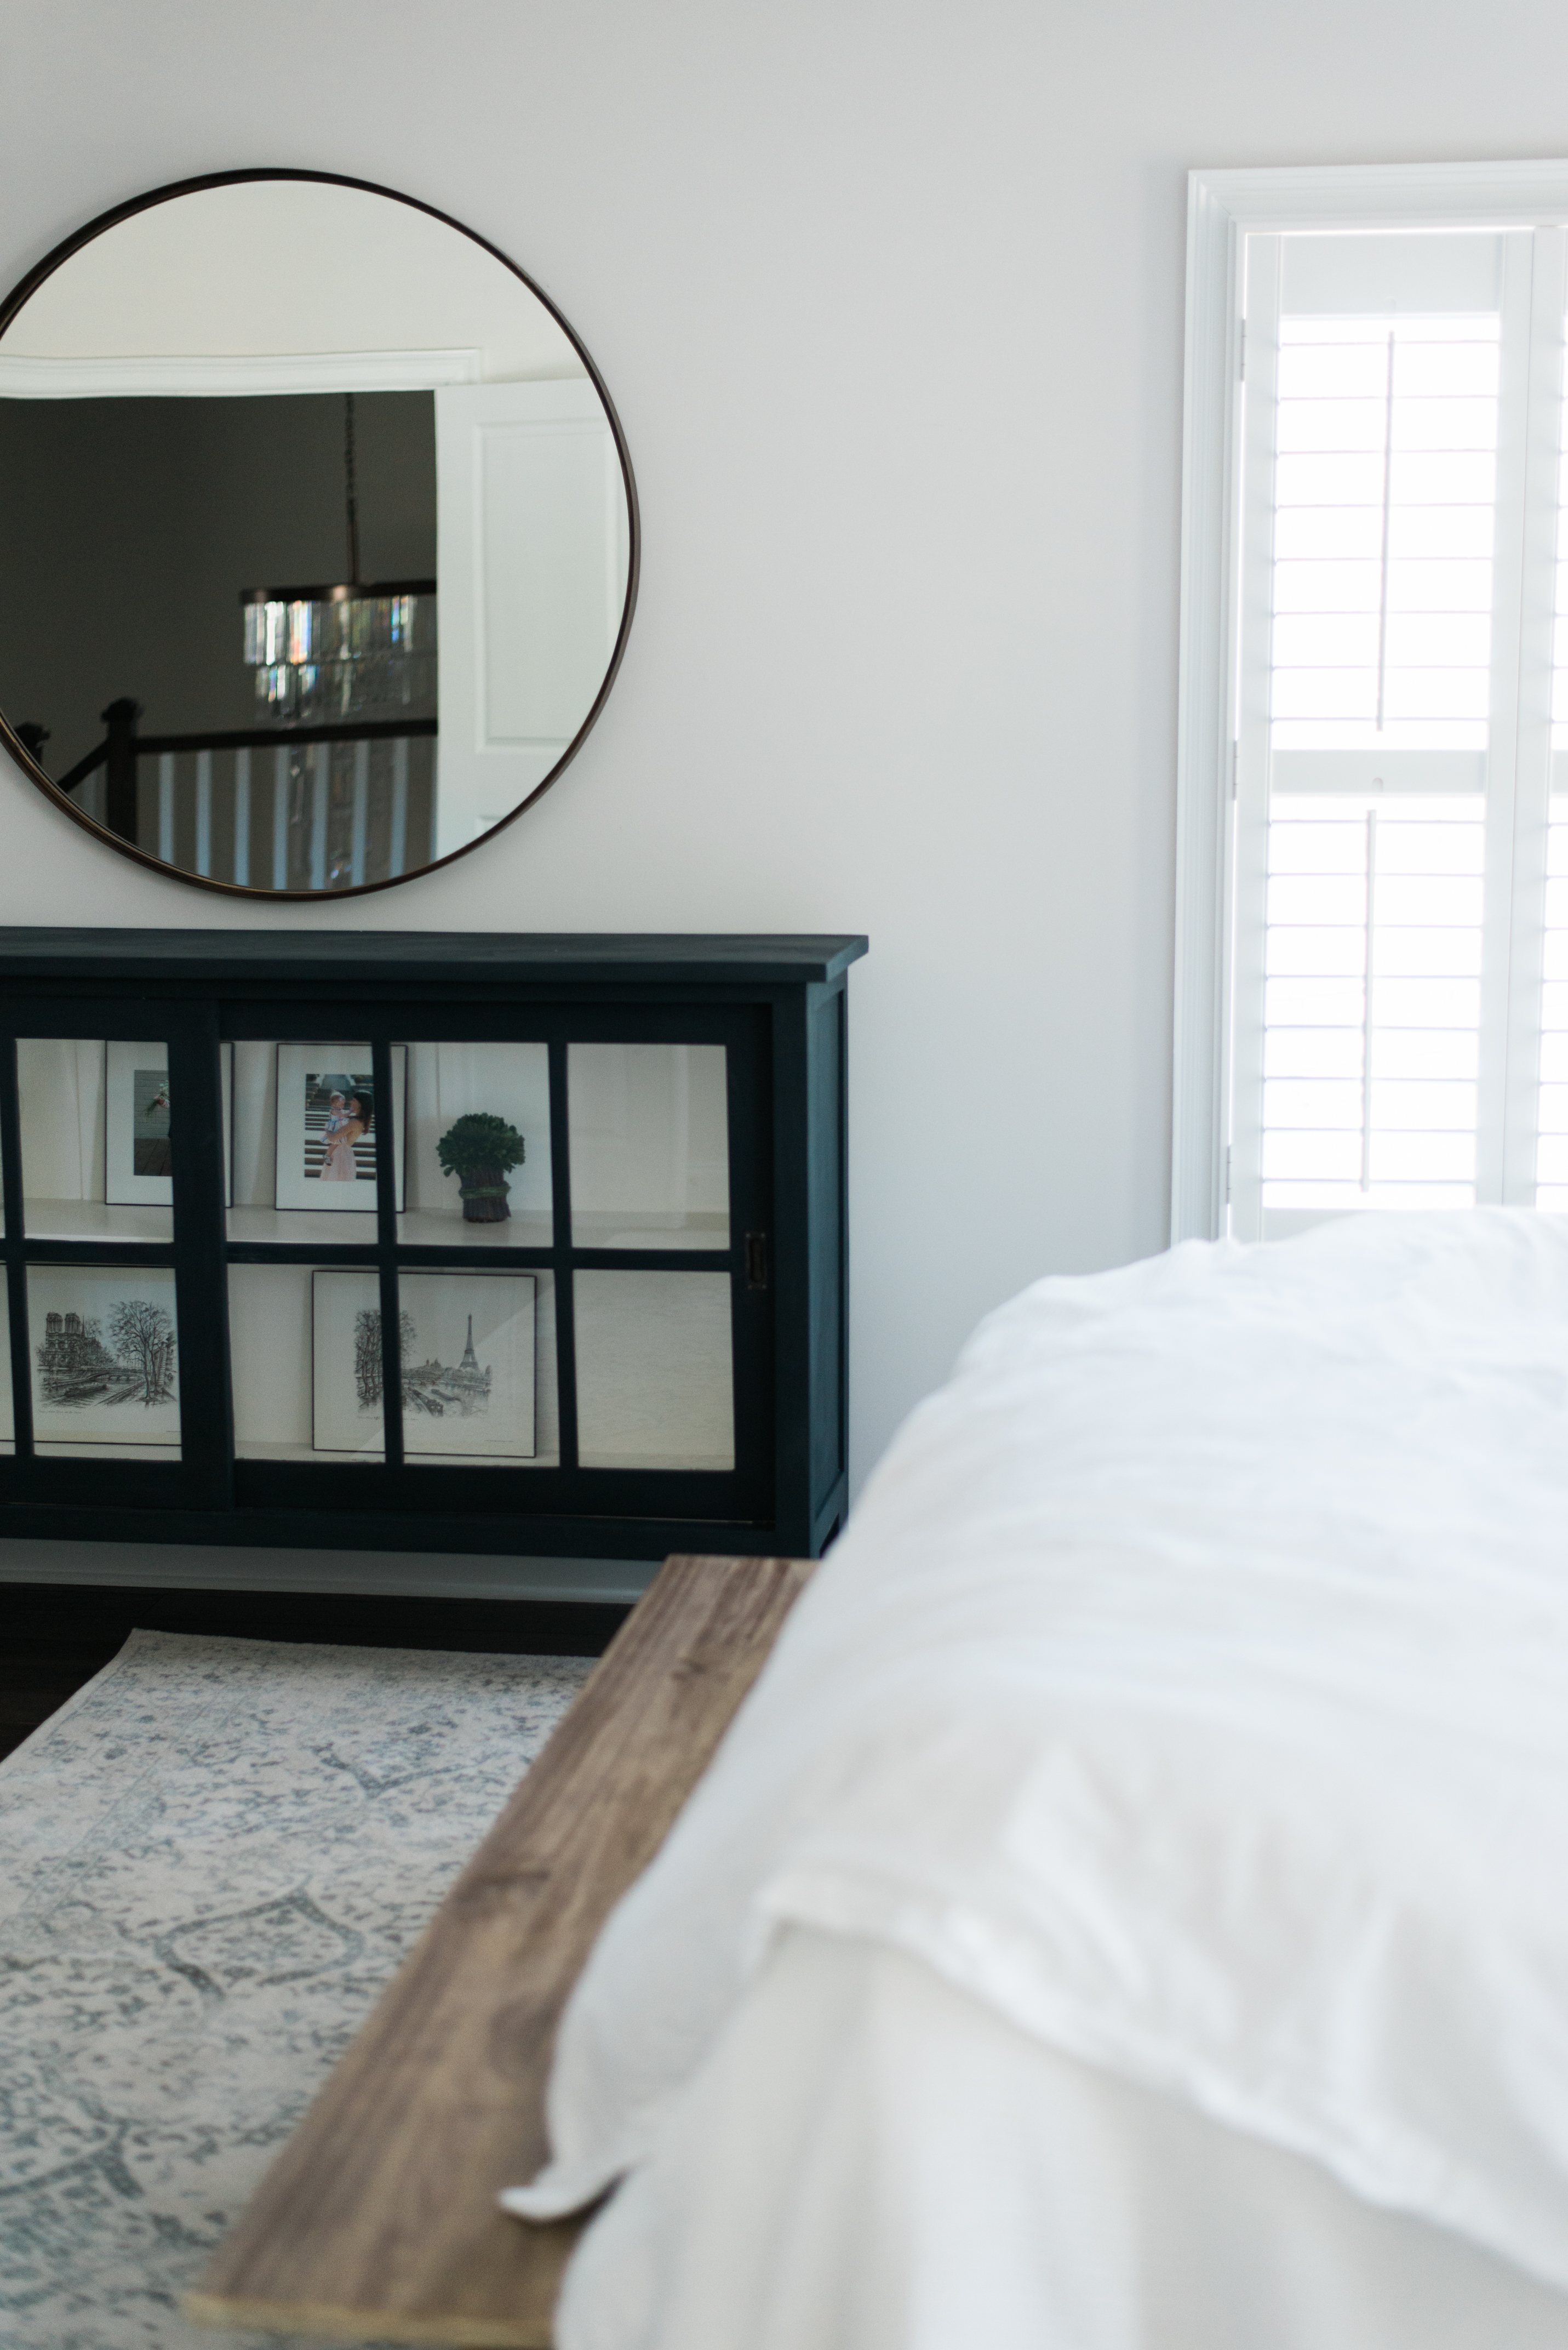 Need a bit of master bedroom design inspiration? Motherhood and Lifestyle Blogger Meghan Basinger is sharing her latest reveal of her master bedroom and how she created this stunning space!